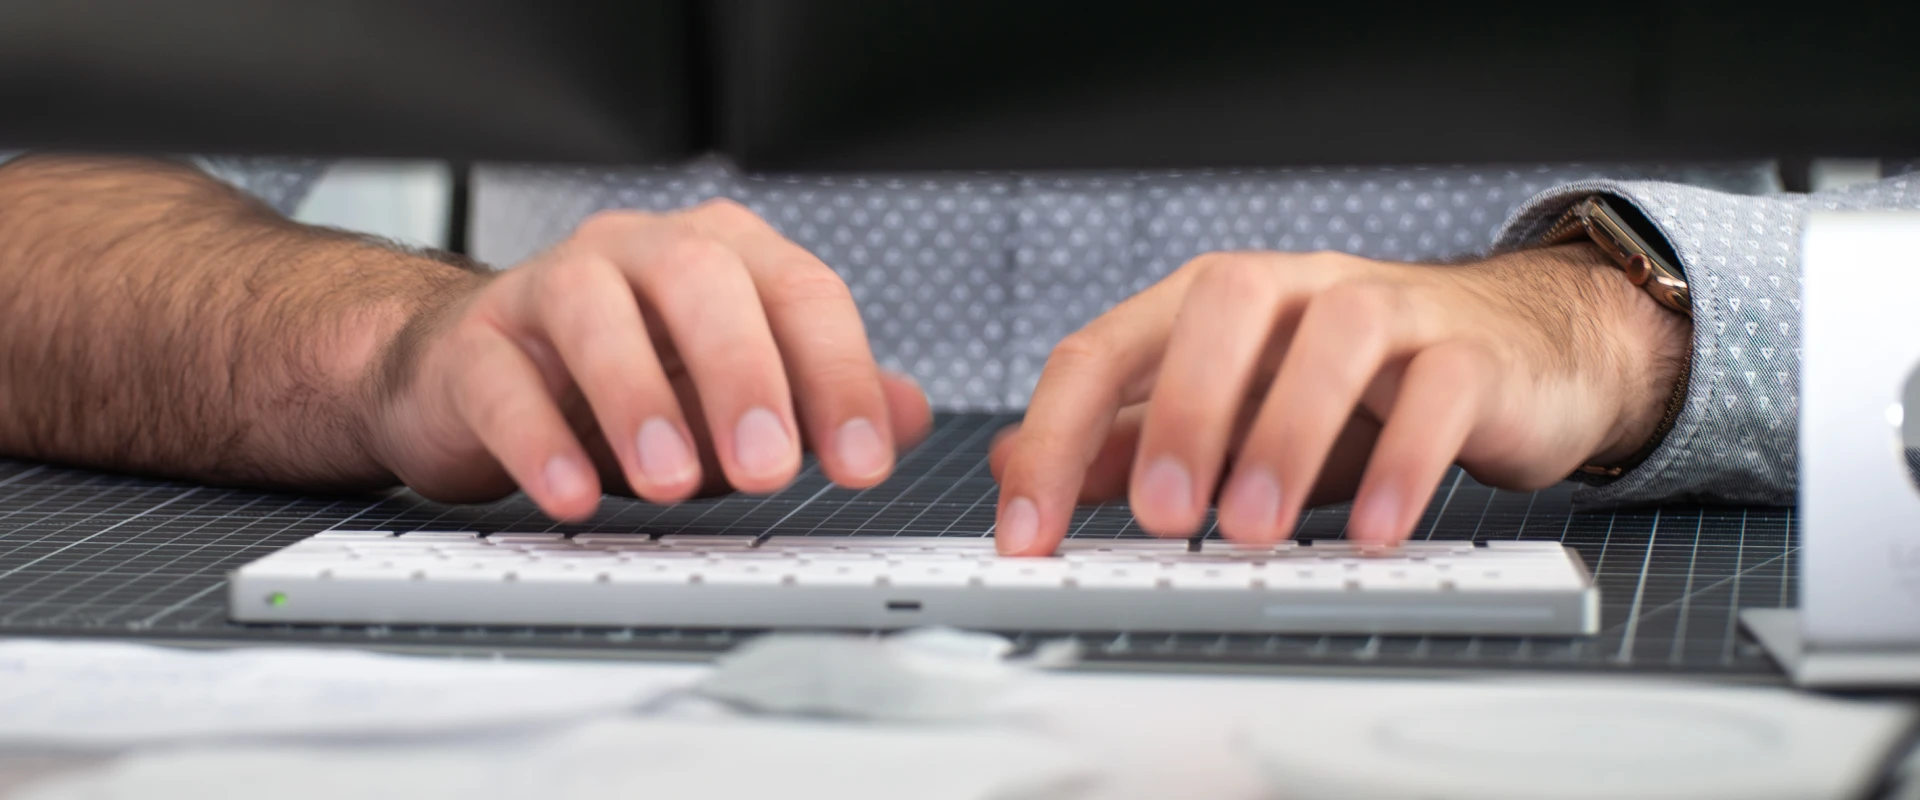 View under the screen of two men's hands writing on a computer keyboard.